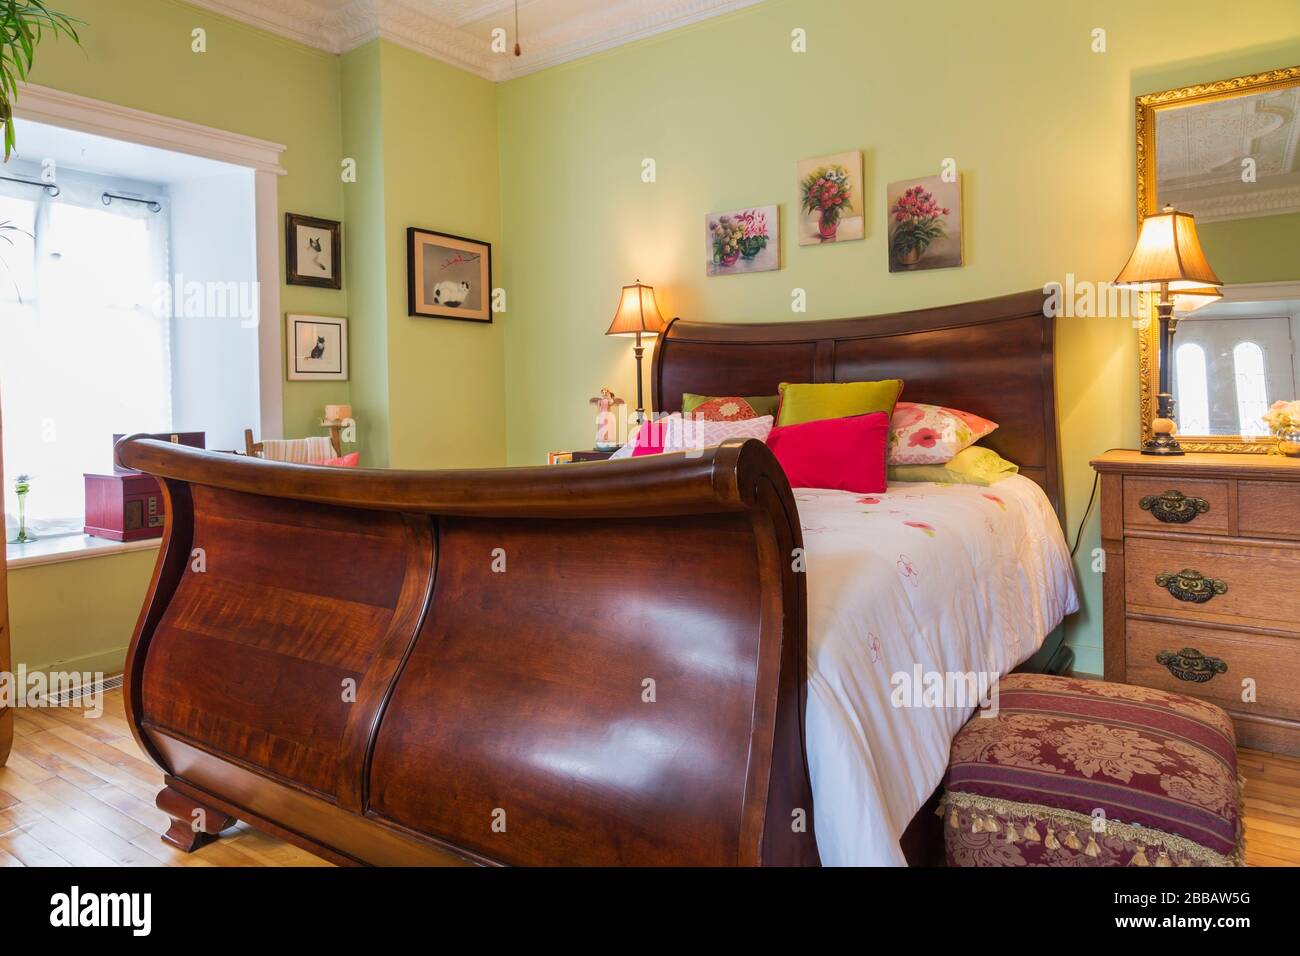 Queen Size Cherry Wood Sleigh Bed And Oak Wood Dresser In Ground